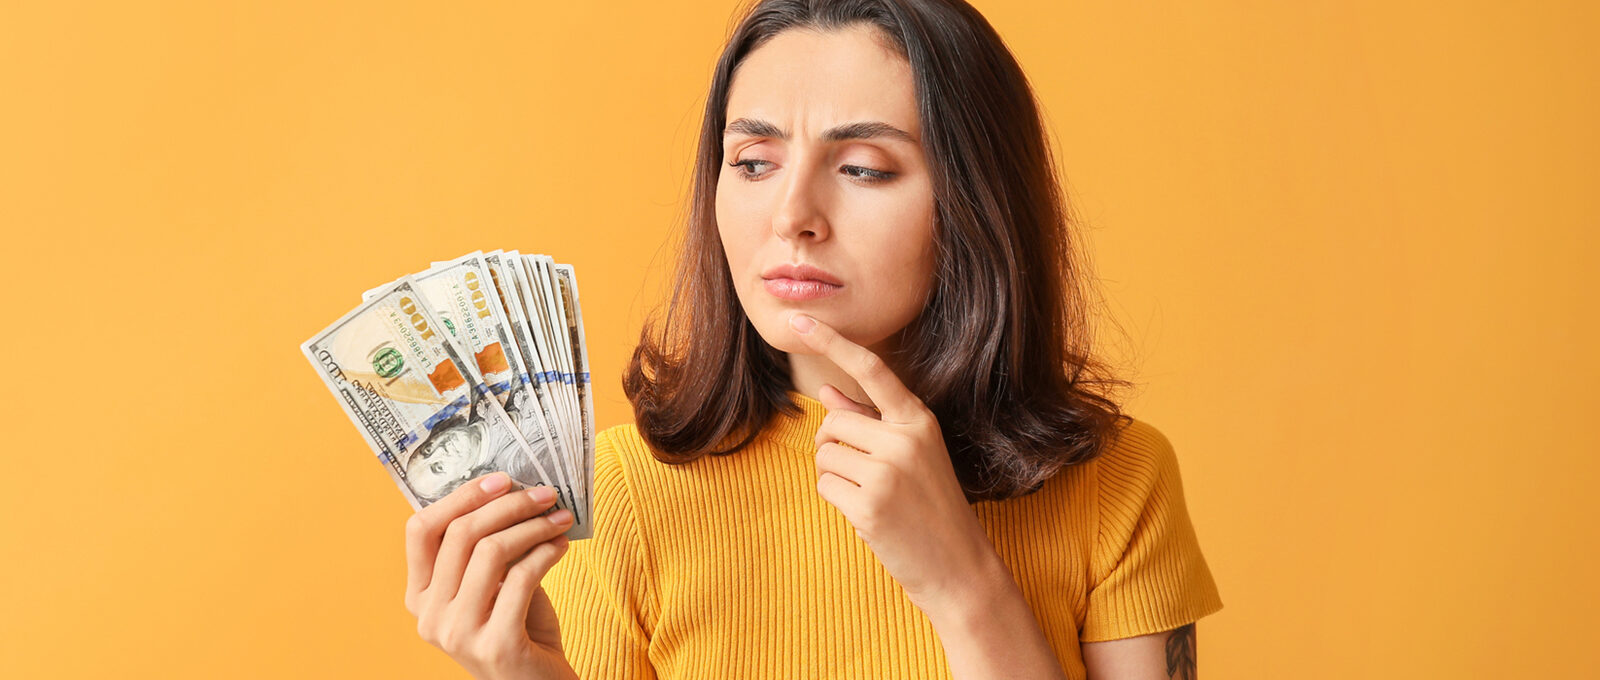 Women looking sceptically at dollar bills in front of an orange background.